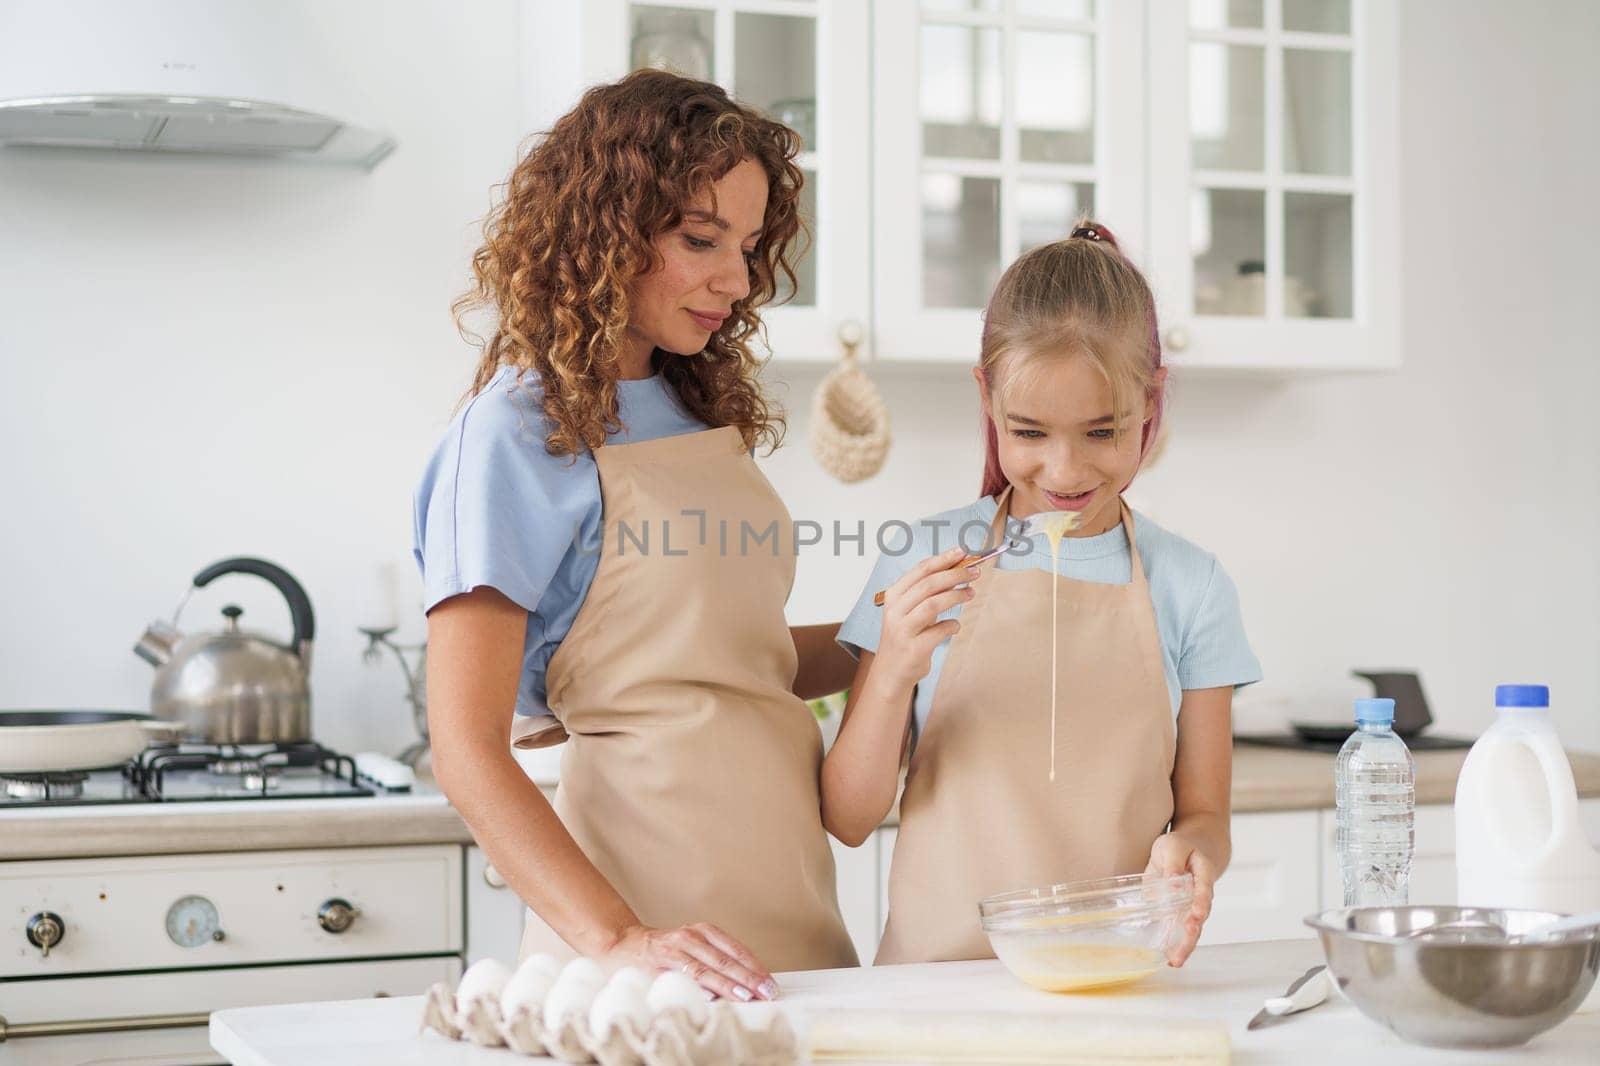 Mother and teen daughter making dough for pastry toghether in kitchen by Fabrikasimf